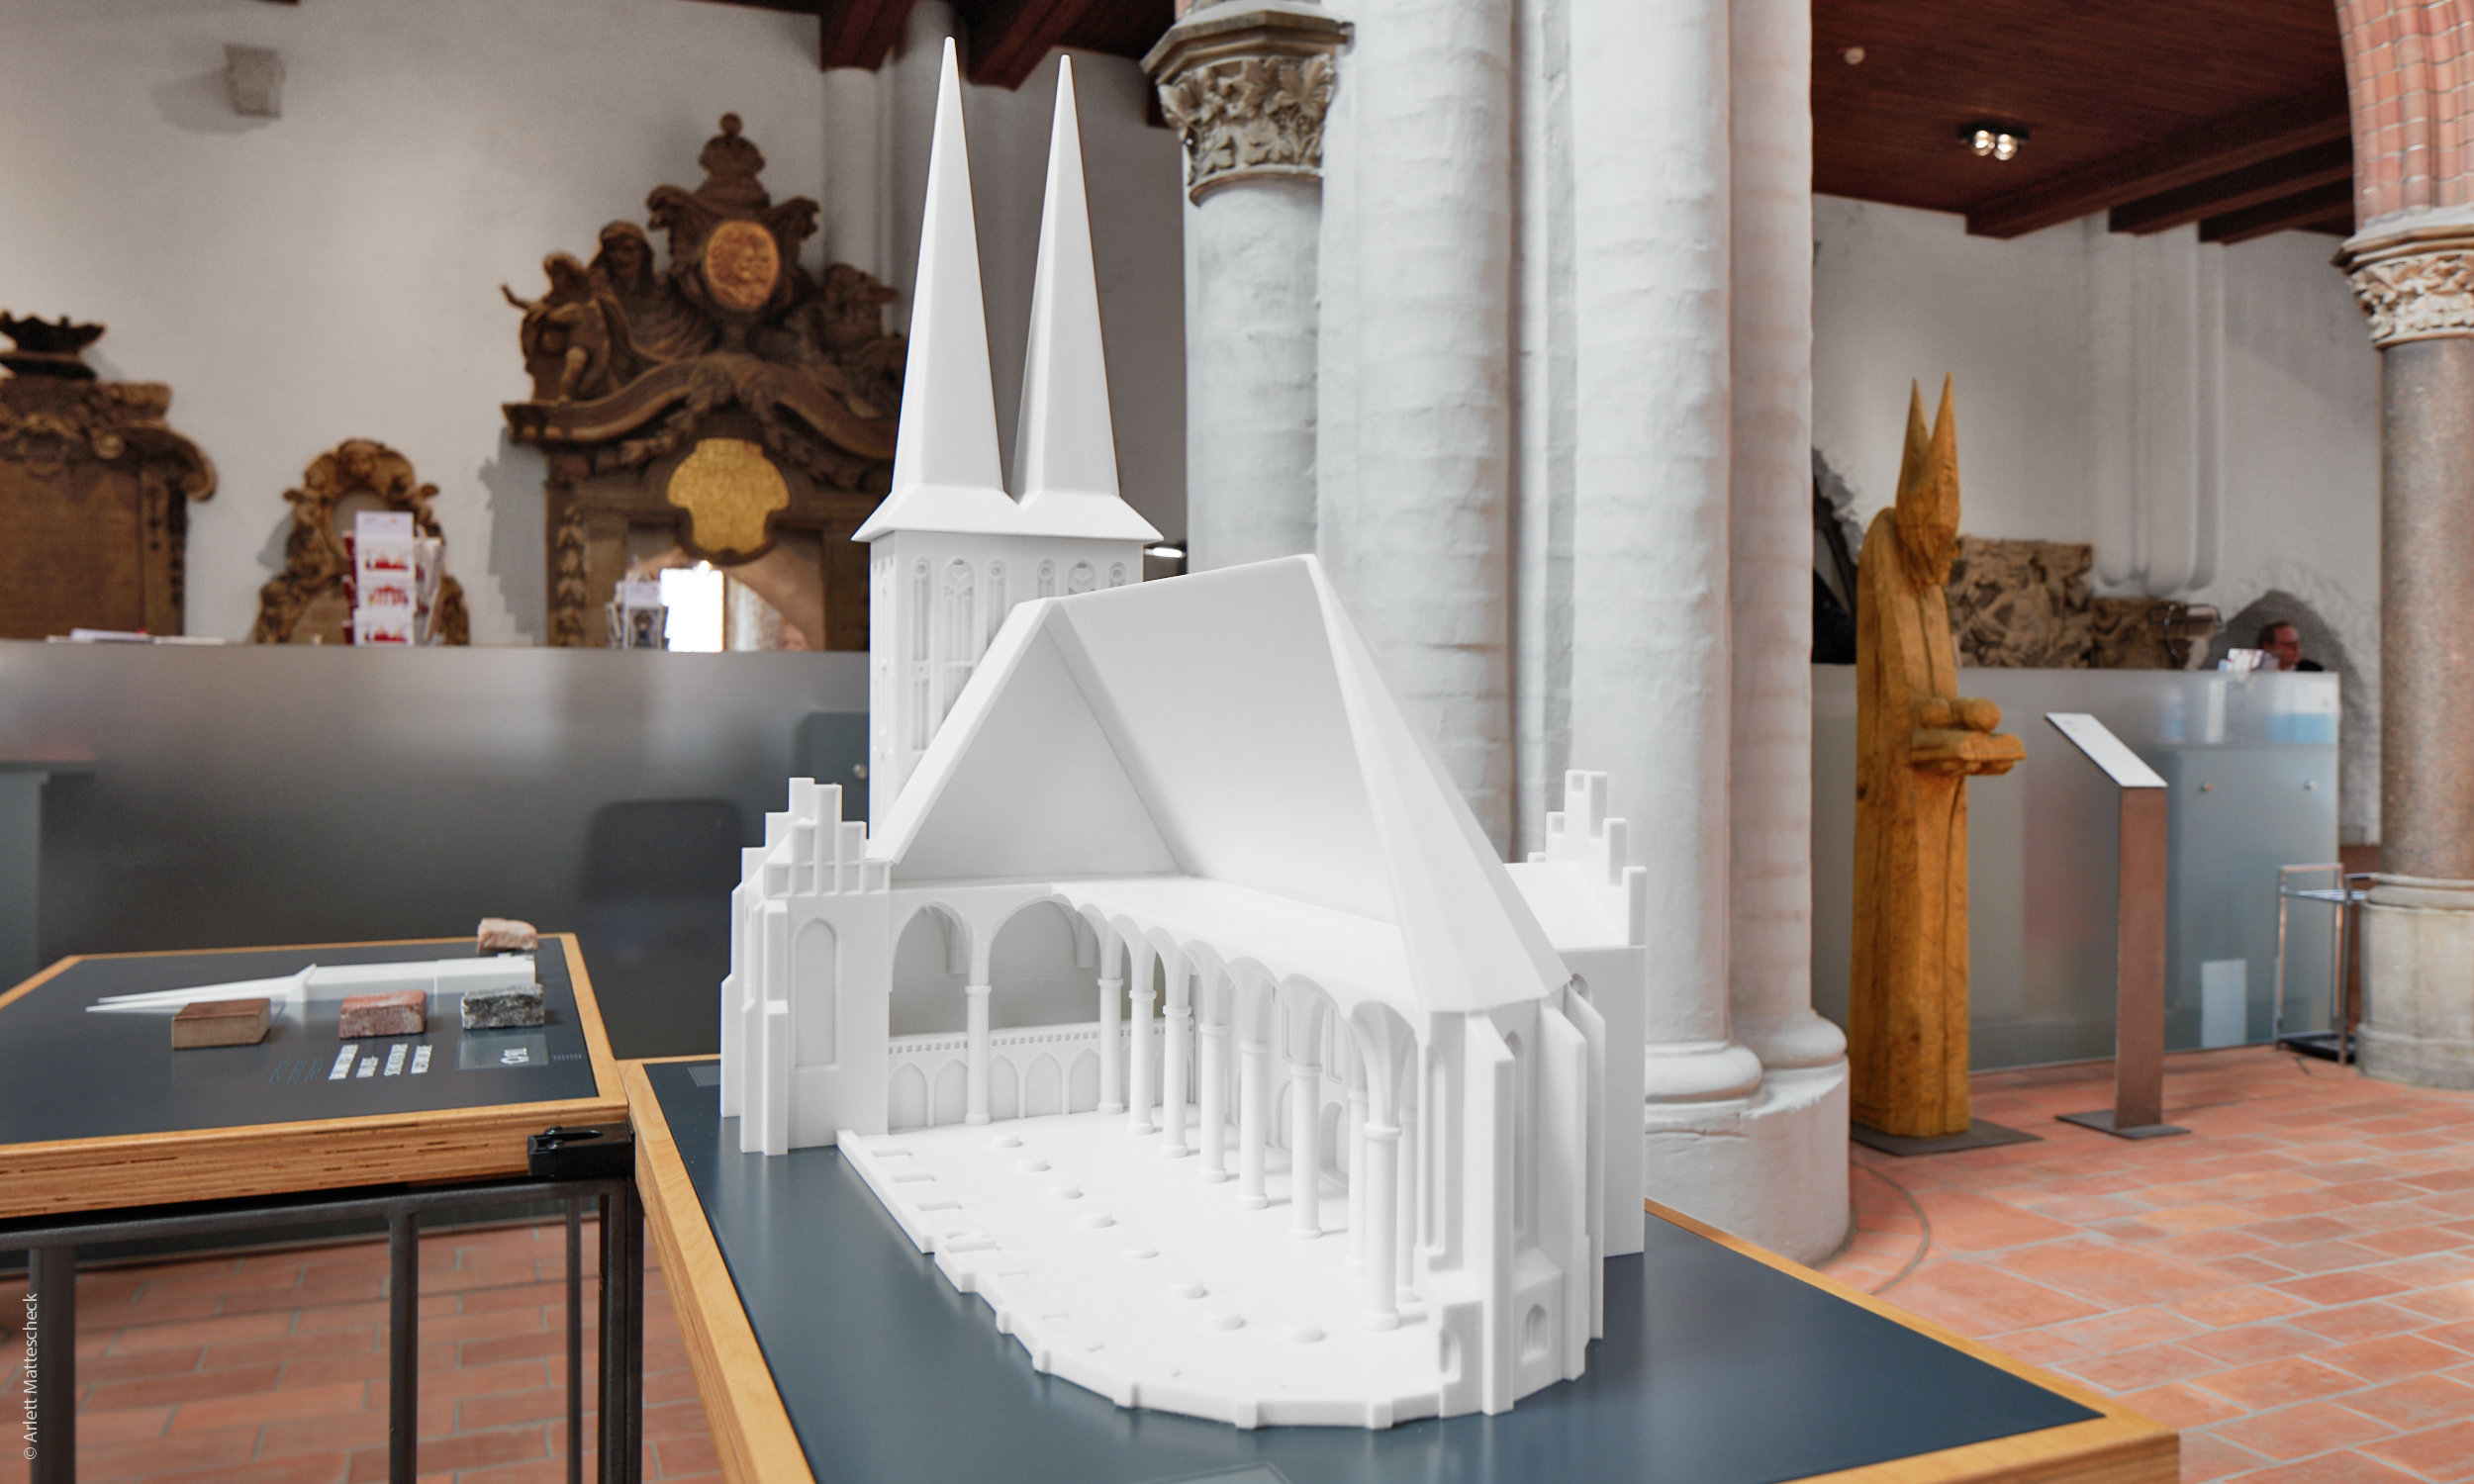 This photo shows the first station of the exhibition from the back. In the foreground is the back of the Nikolaikirche, in the background is the model of the west facade with the material samples.